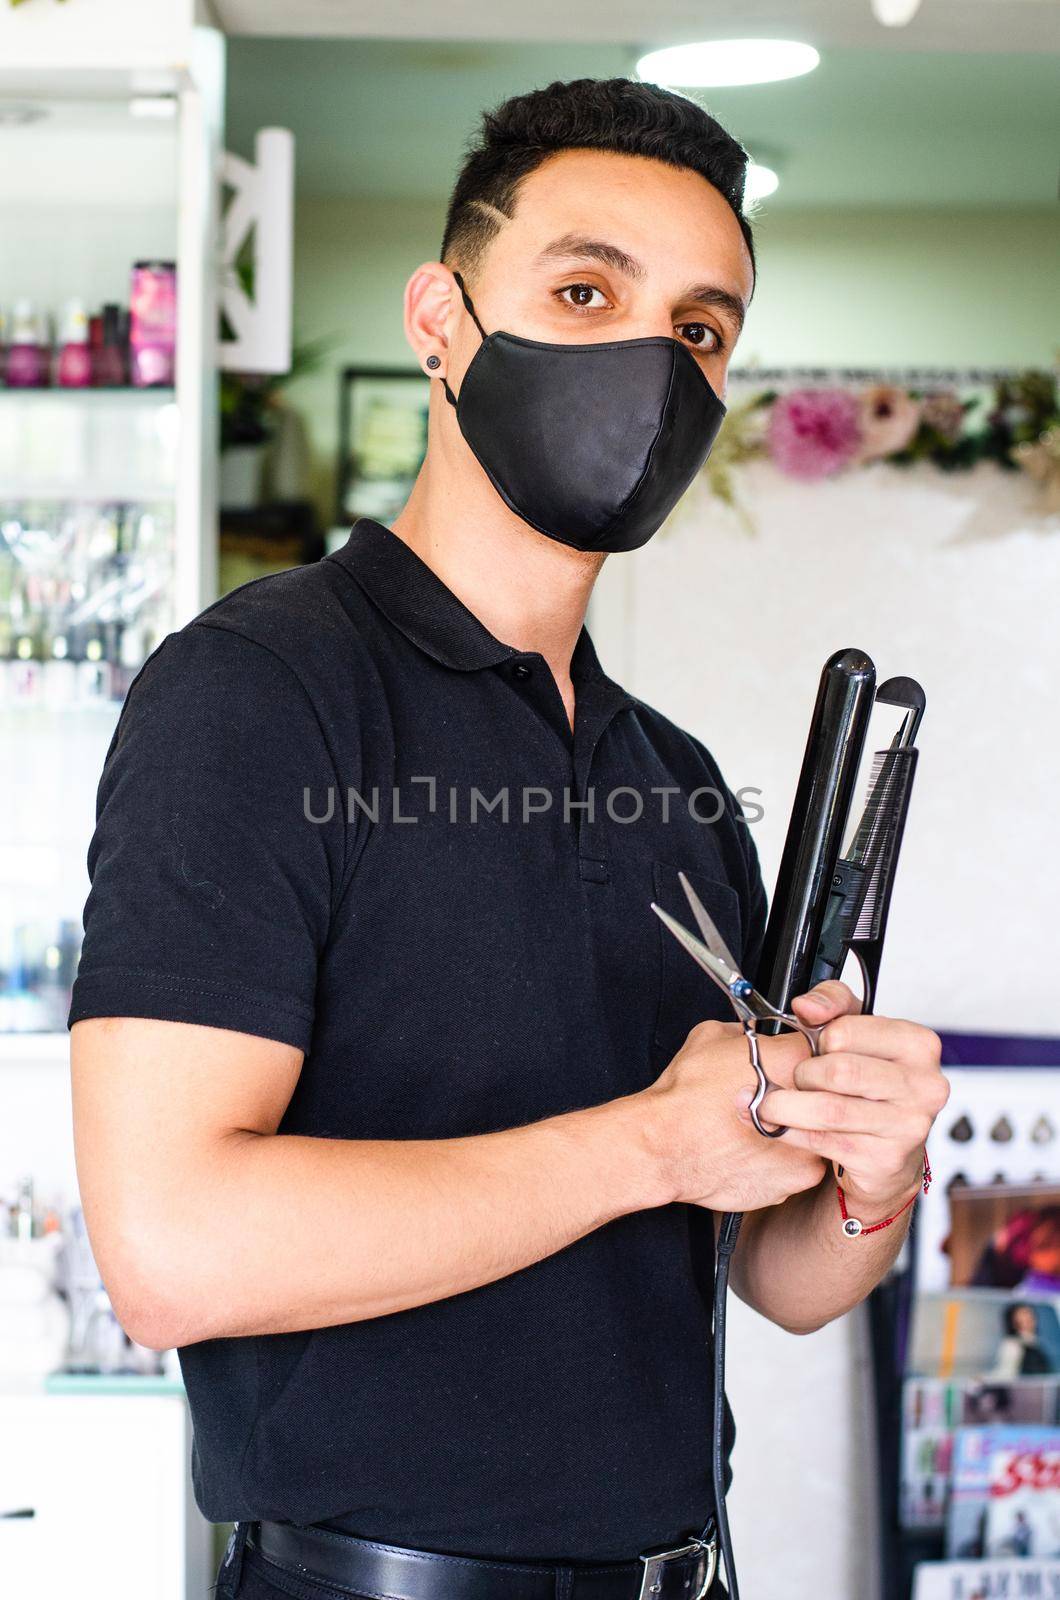 Barber Shop. The hairdresser has a scissors and a comb, with a mask for the pandemic. by Peruphotoart